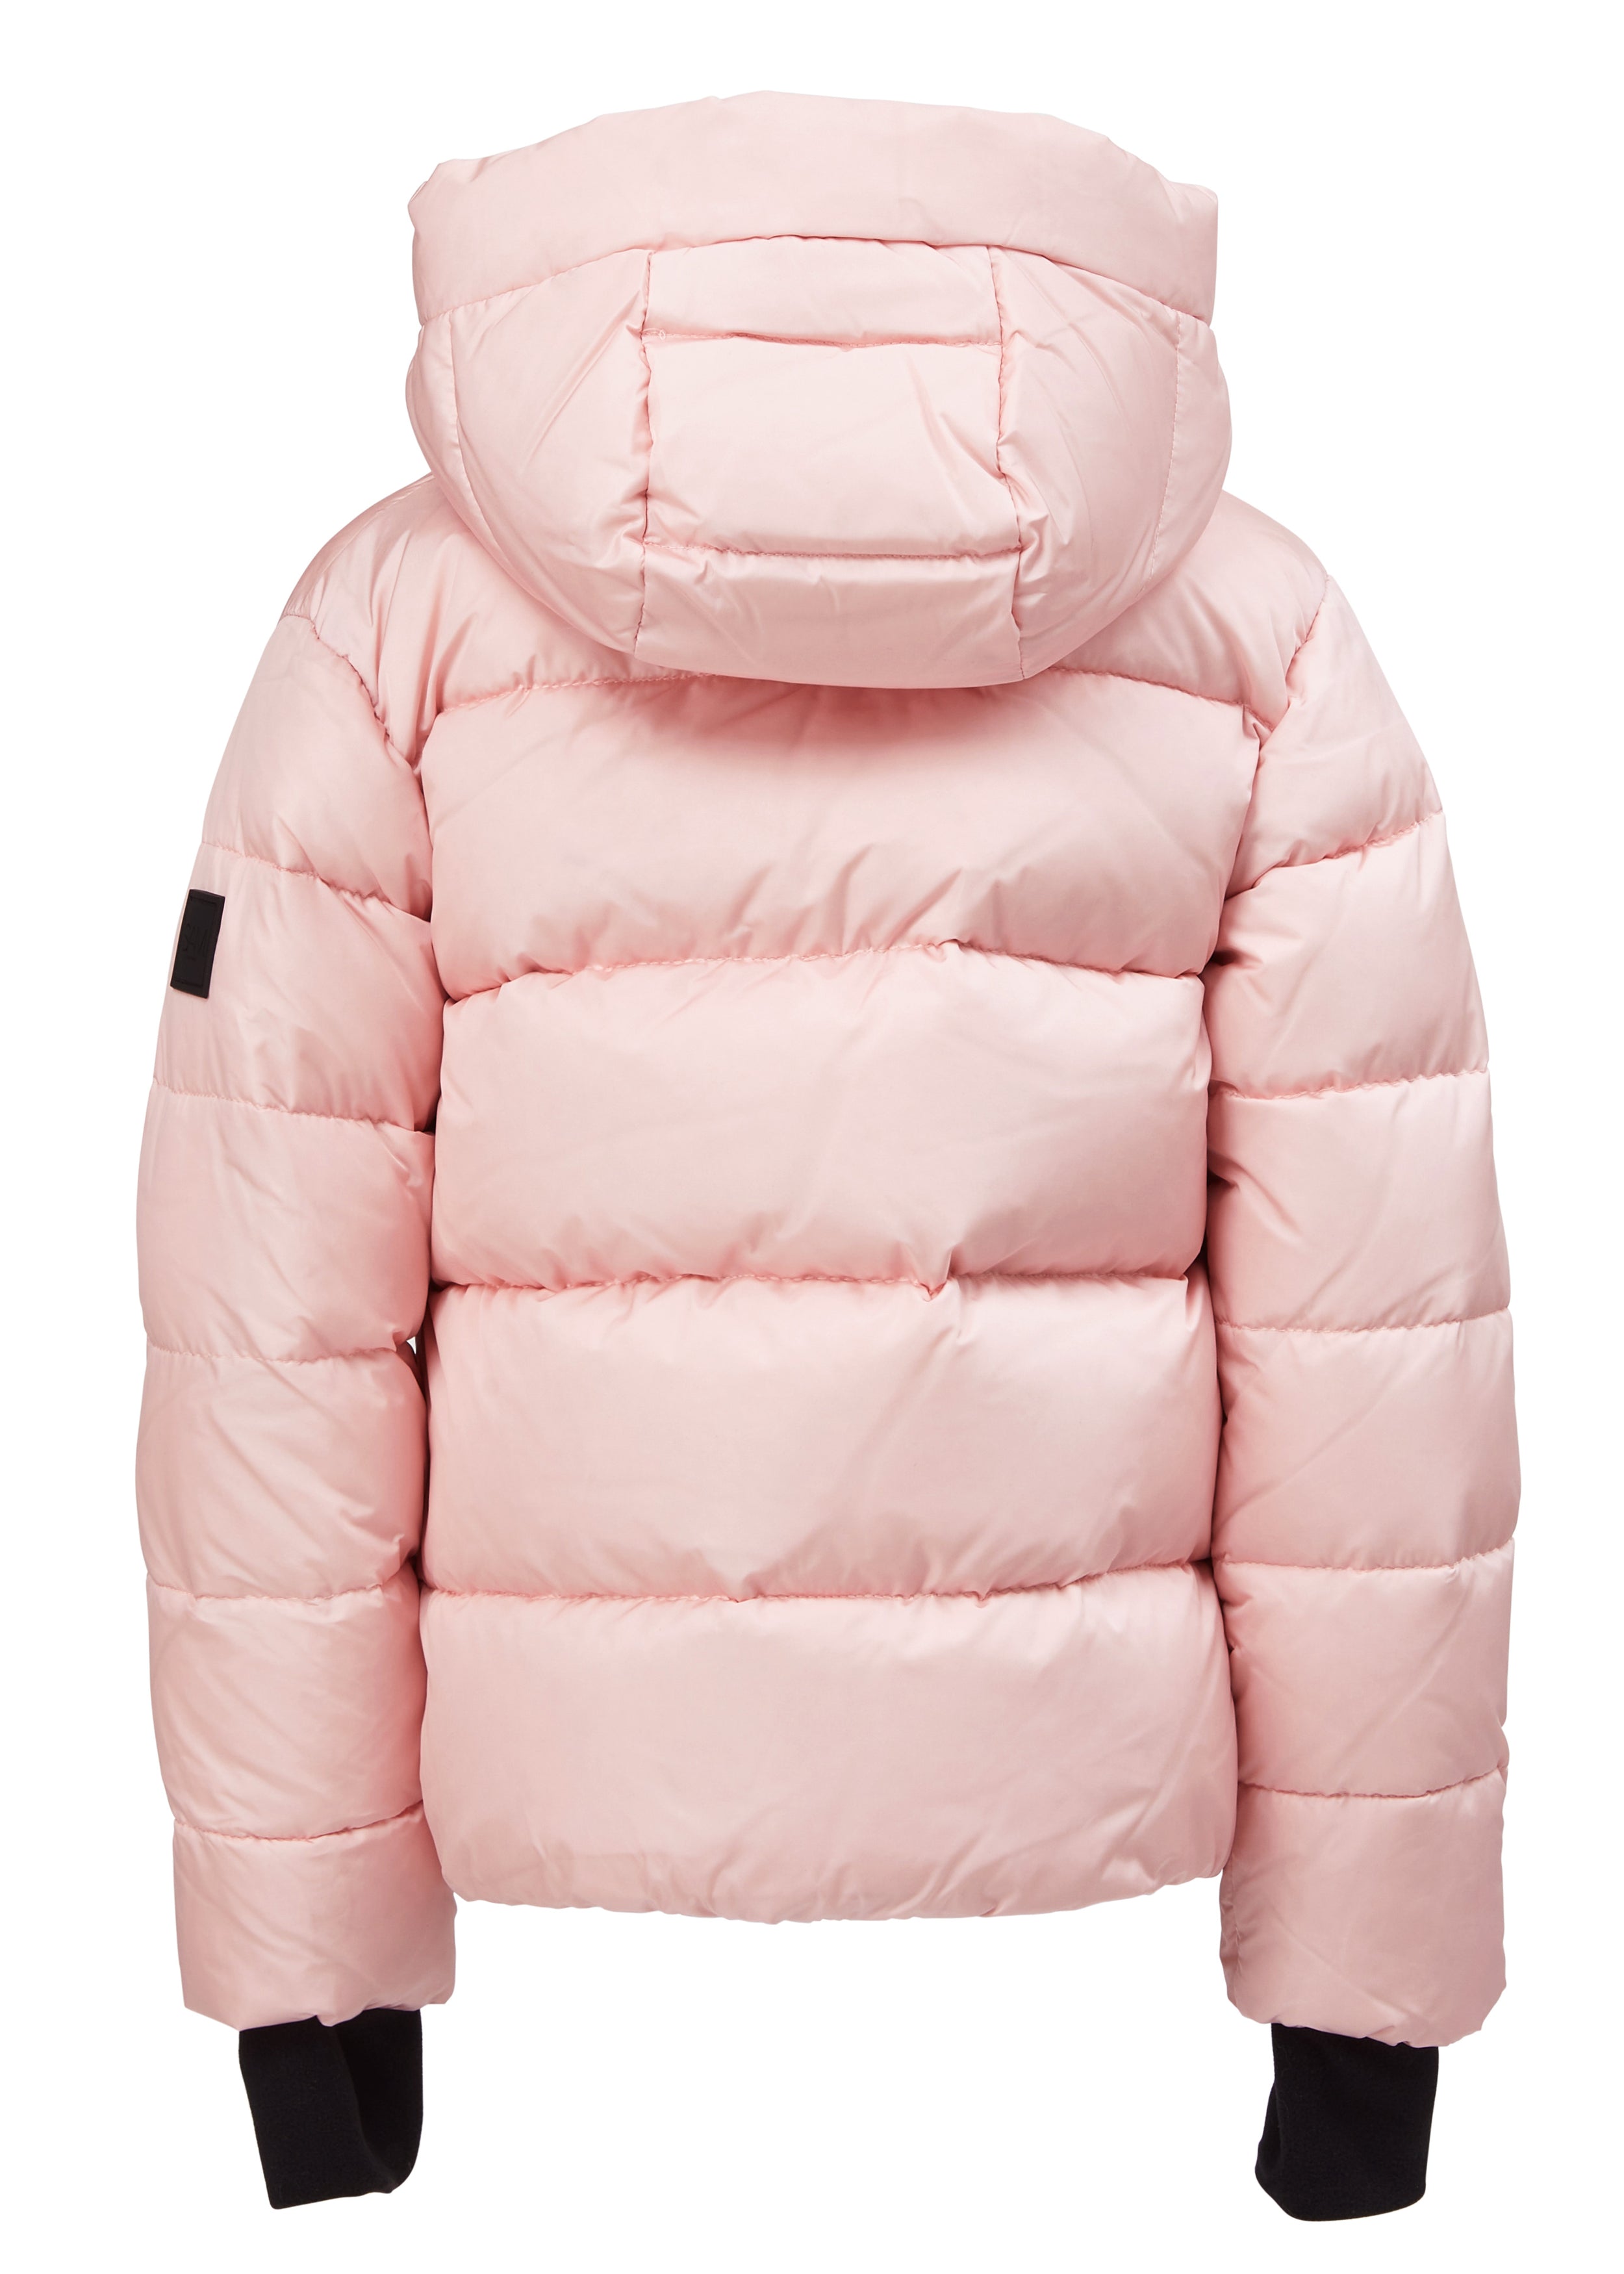 Pacific Trail Girls' Reversible to Faux Fur Tie-Dye Hooded Jacket | Big 5  Sporting Goods